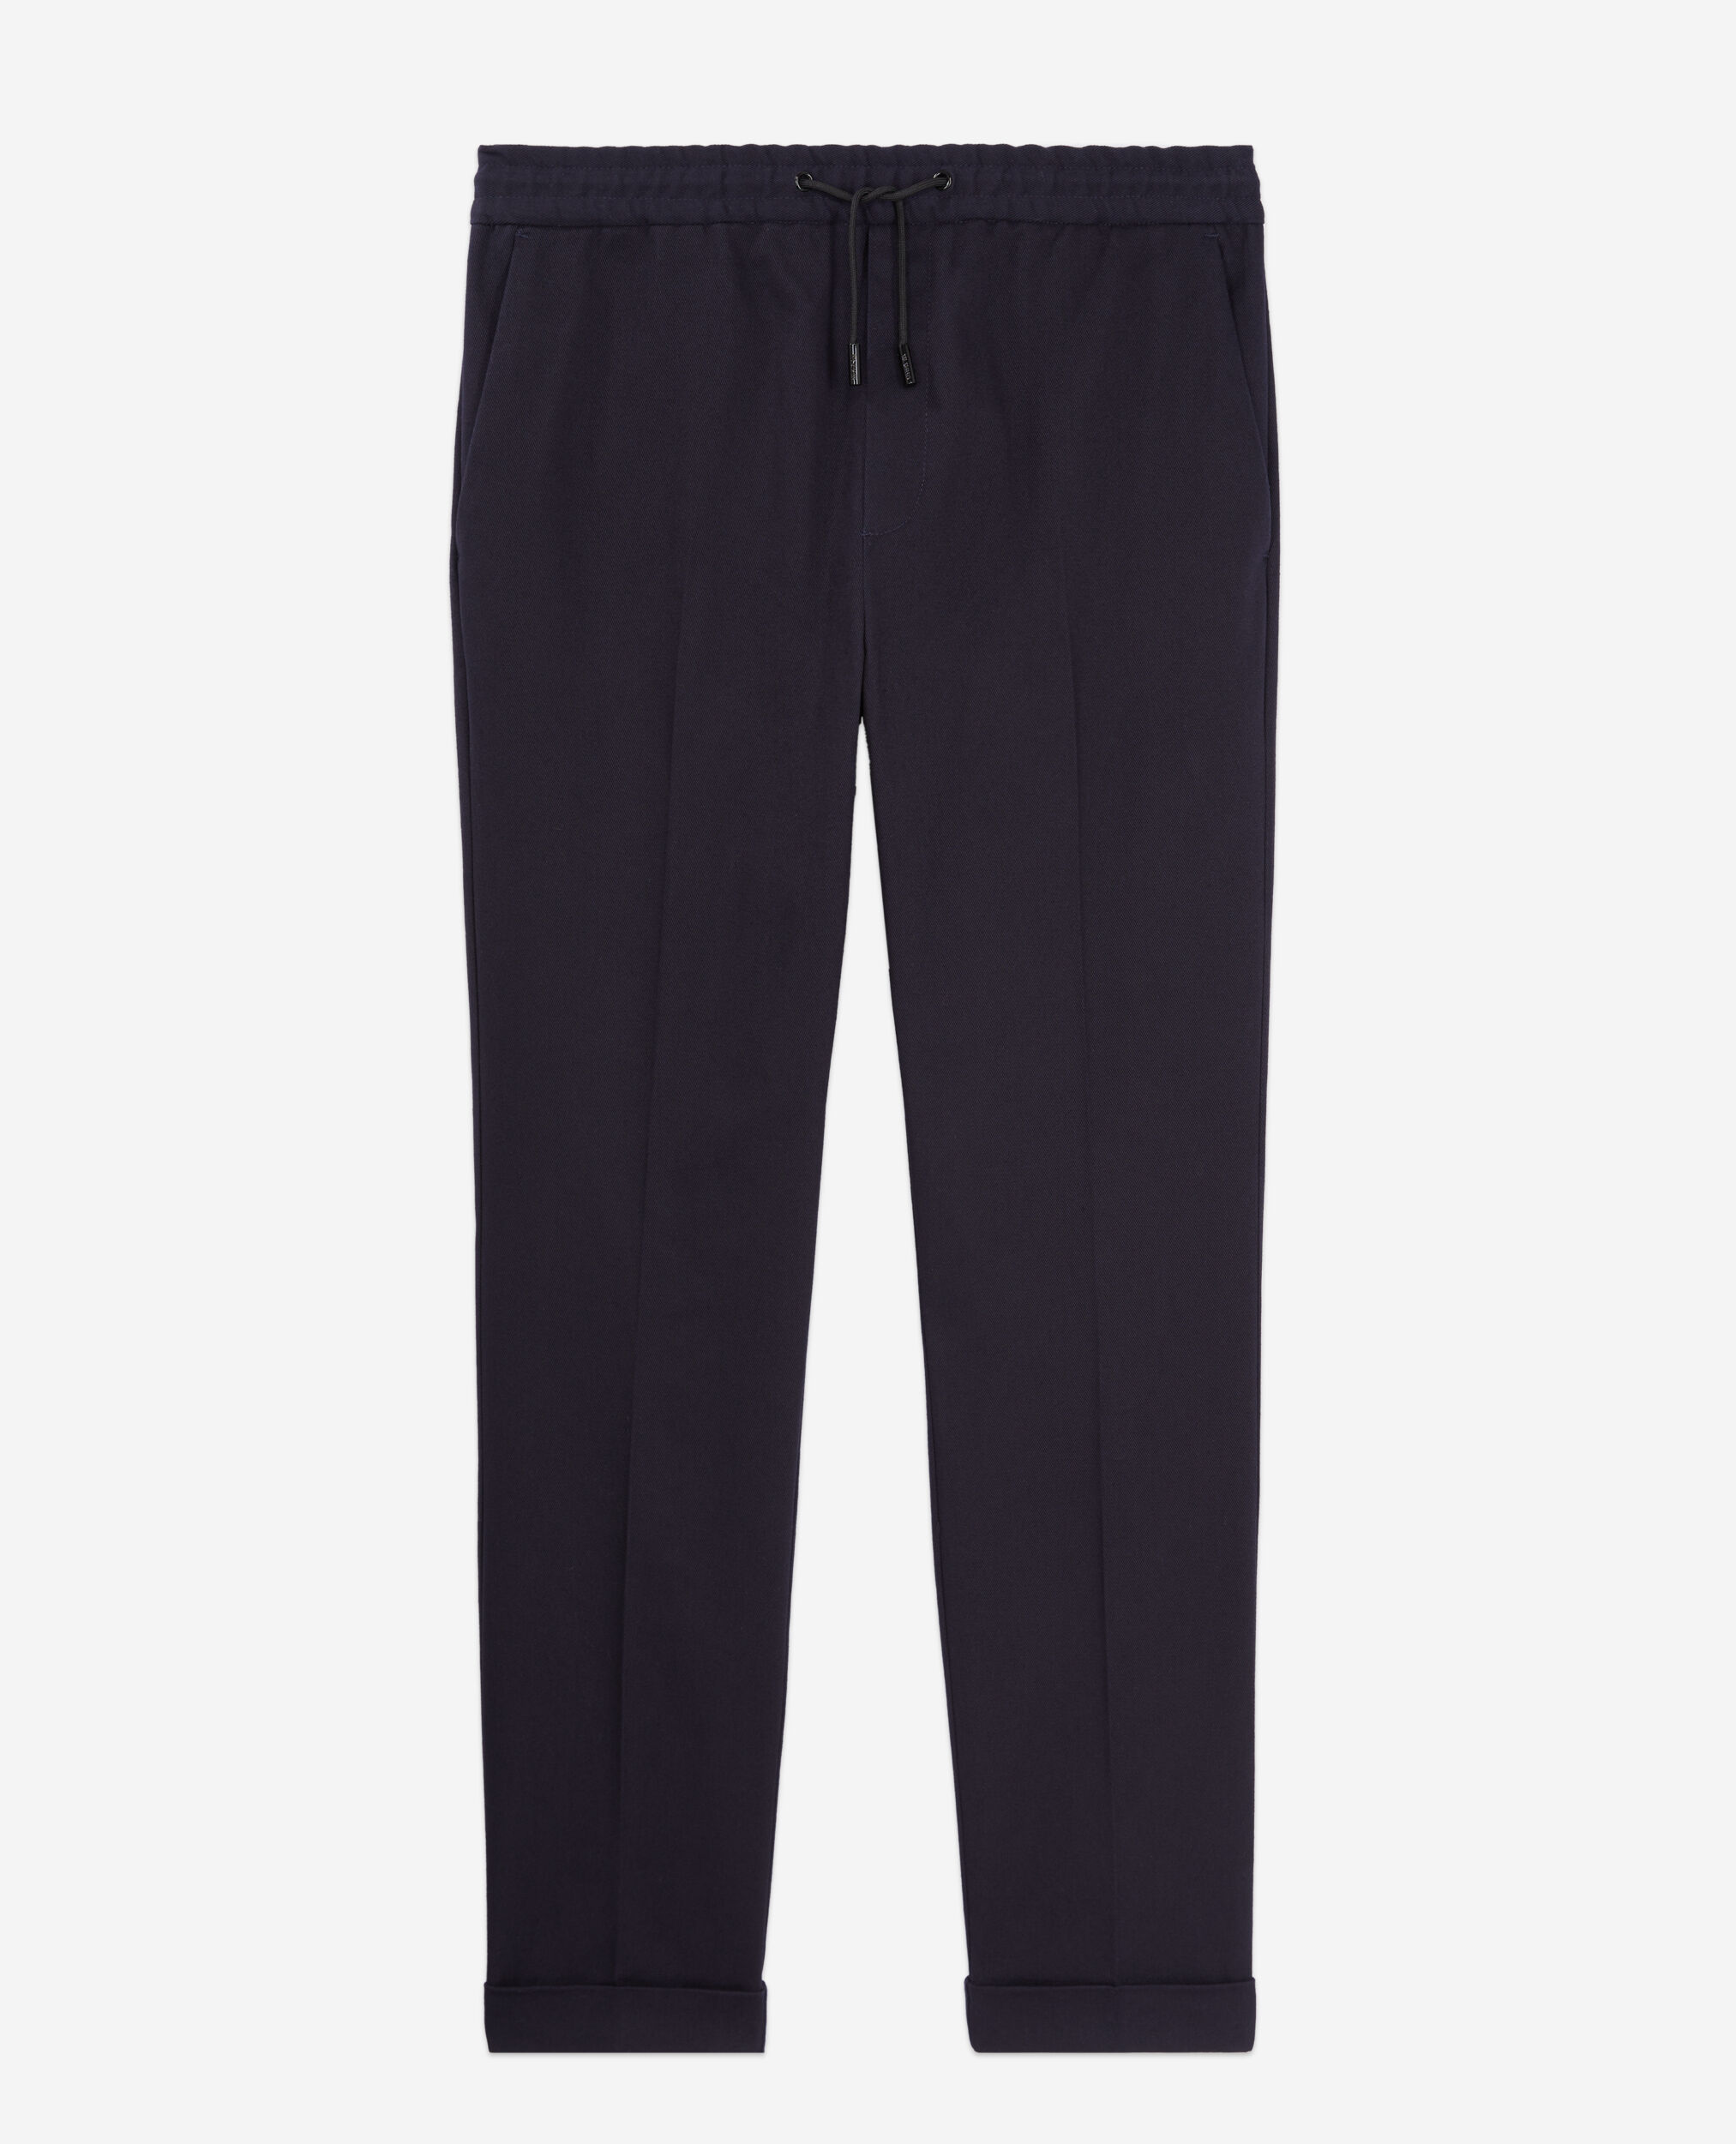 Cotton blue trousers, DARK NAVY, hi-res image number null